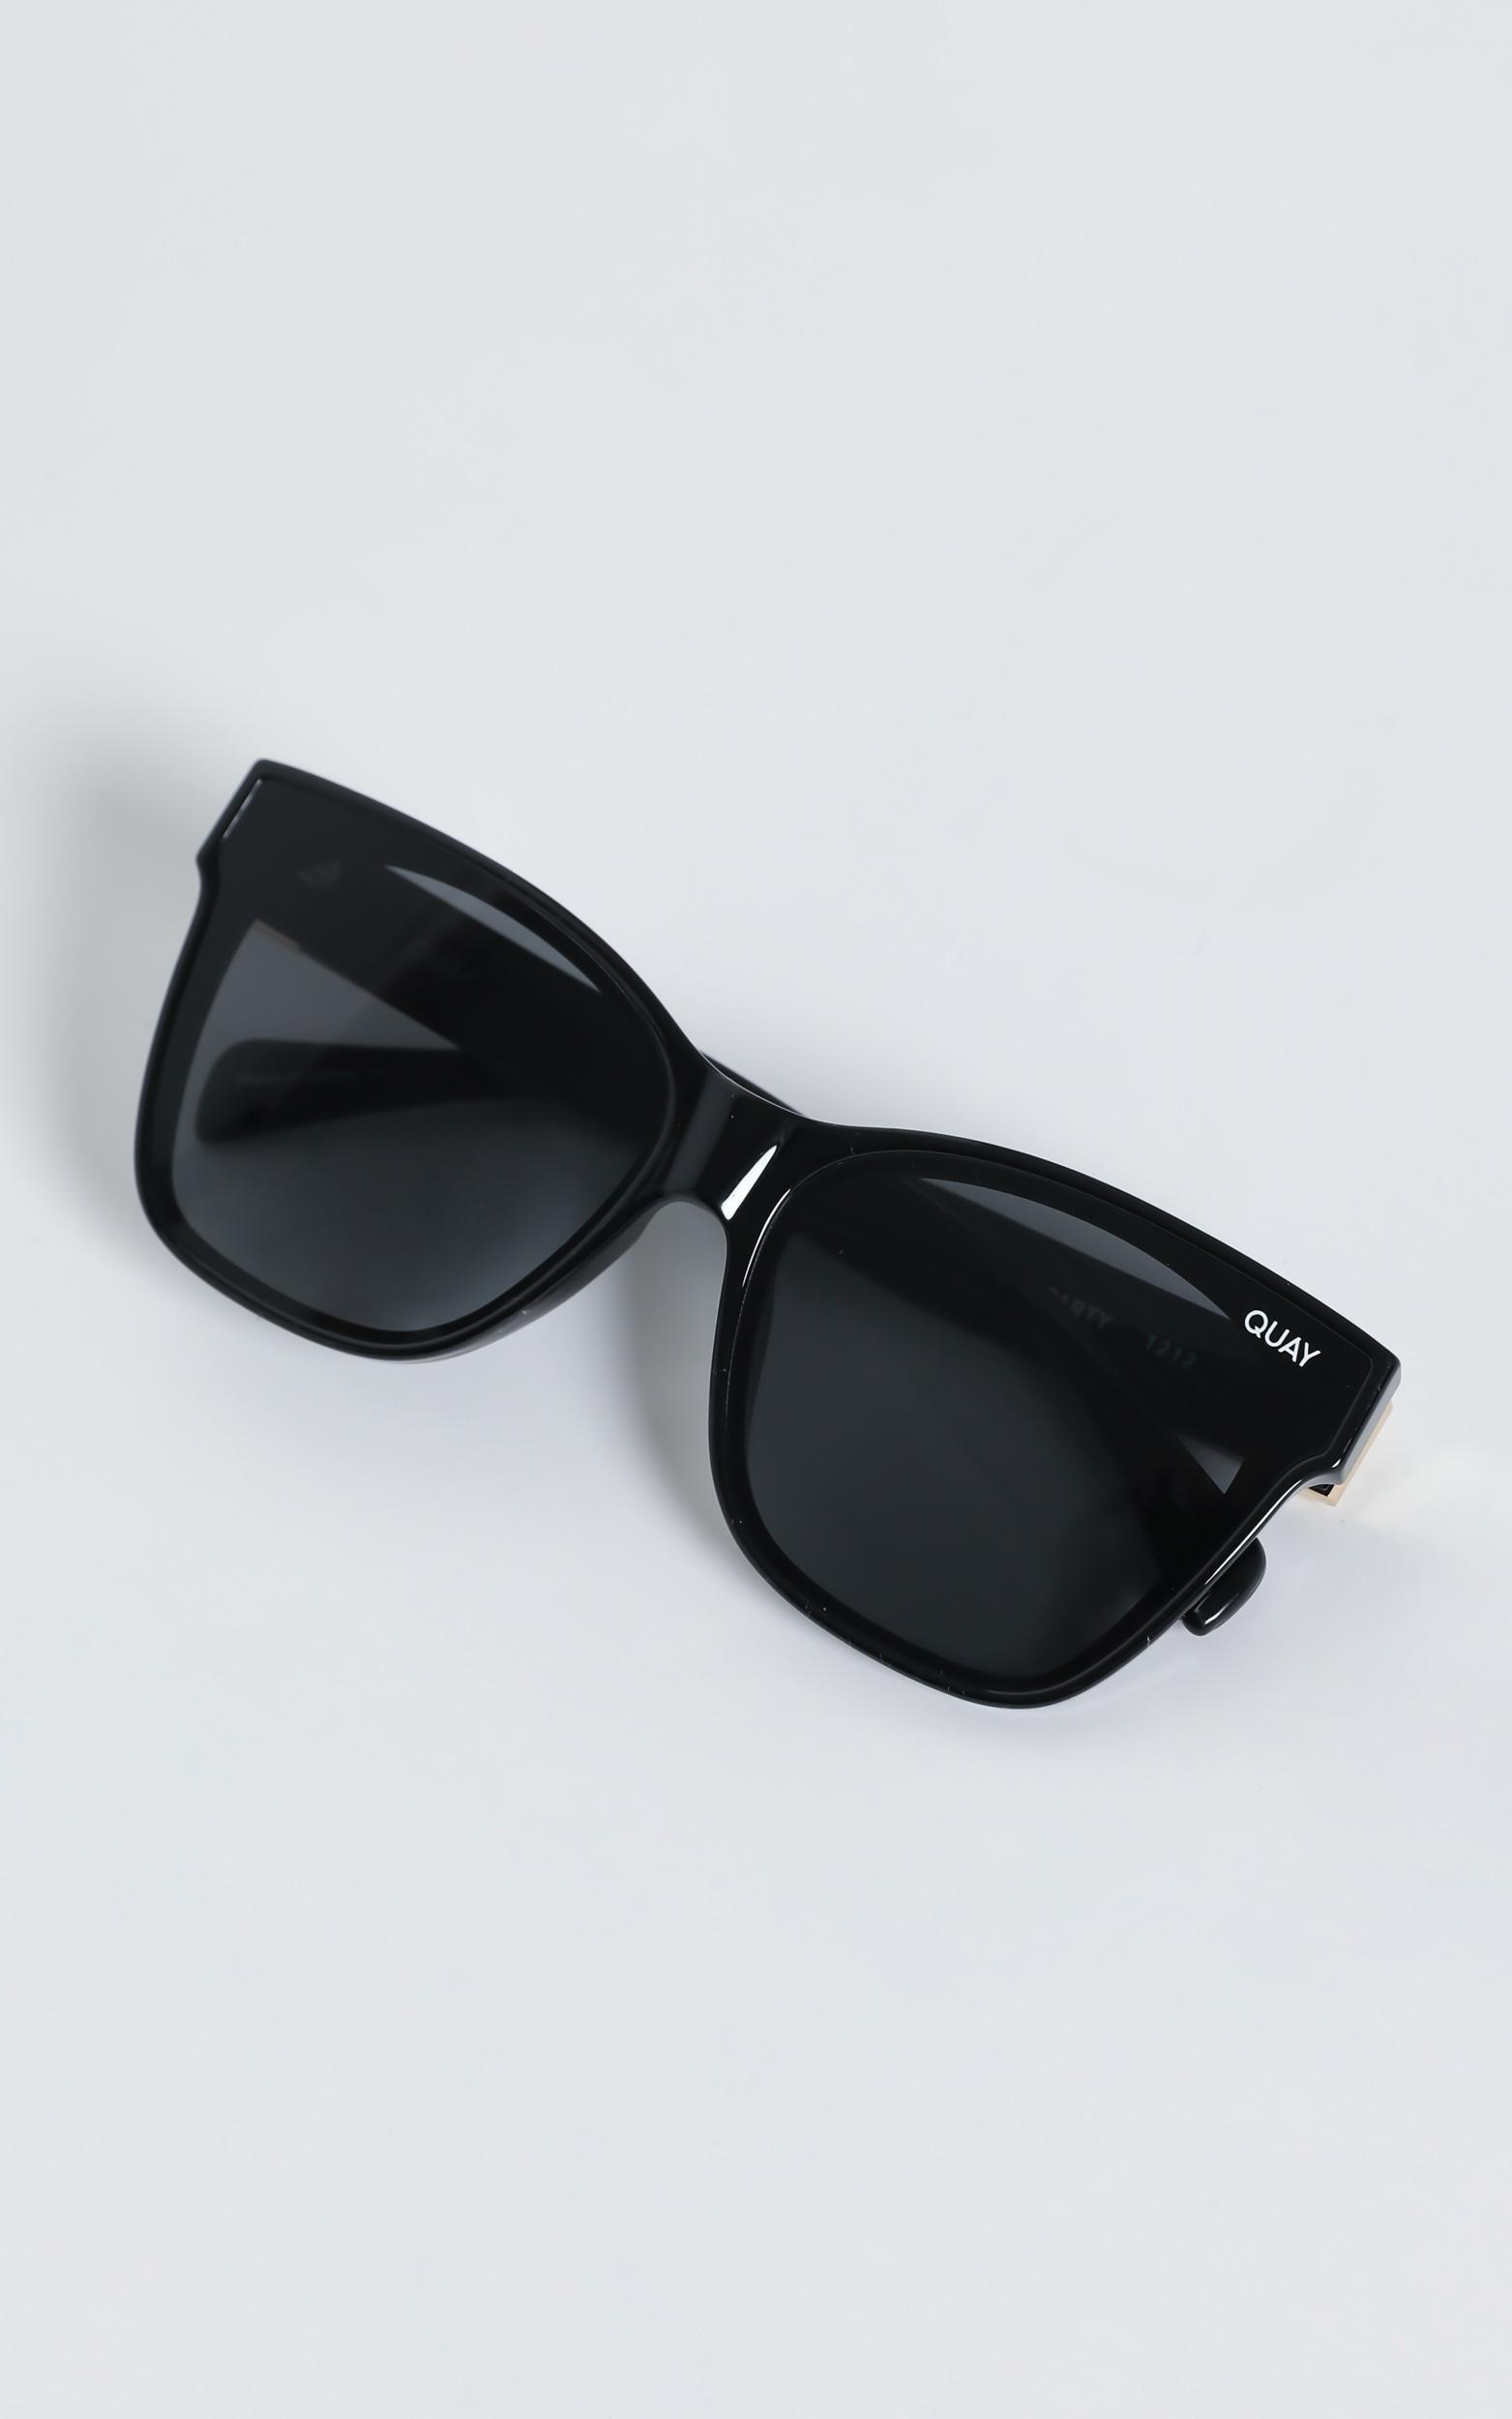 Quay - After Party Sunglasses in Black / Smoke | Showpo